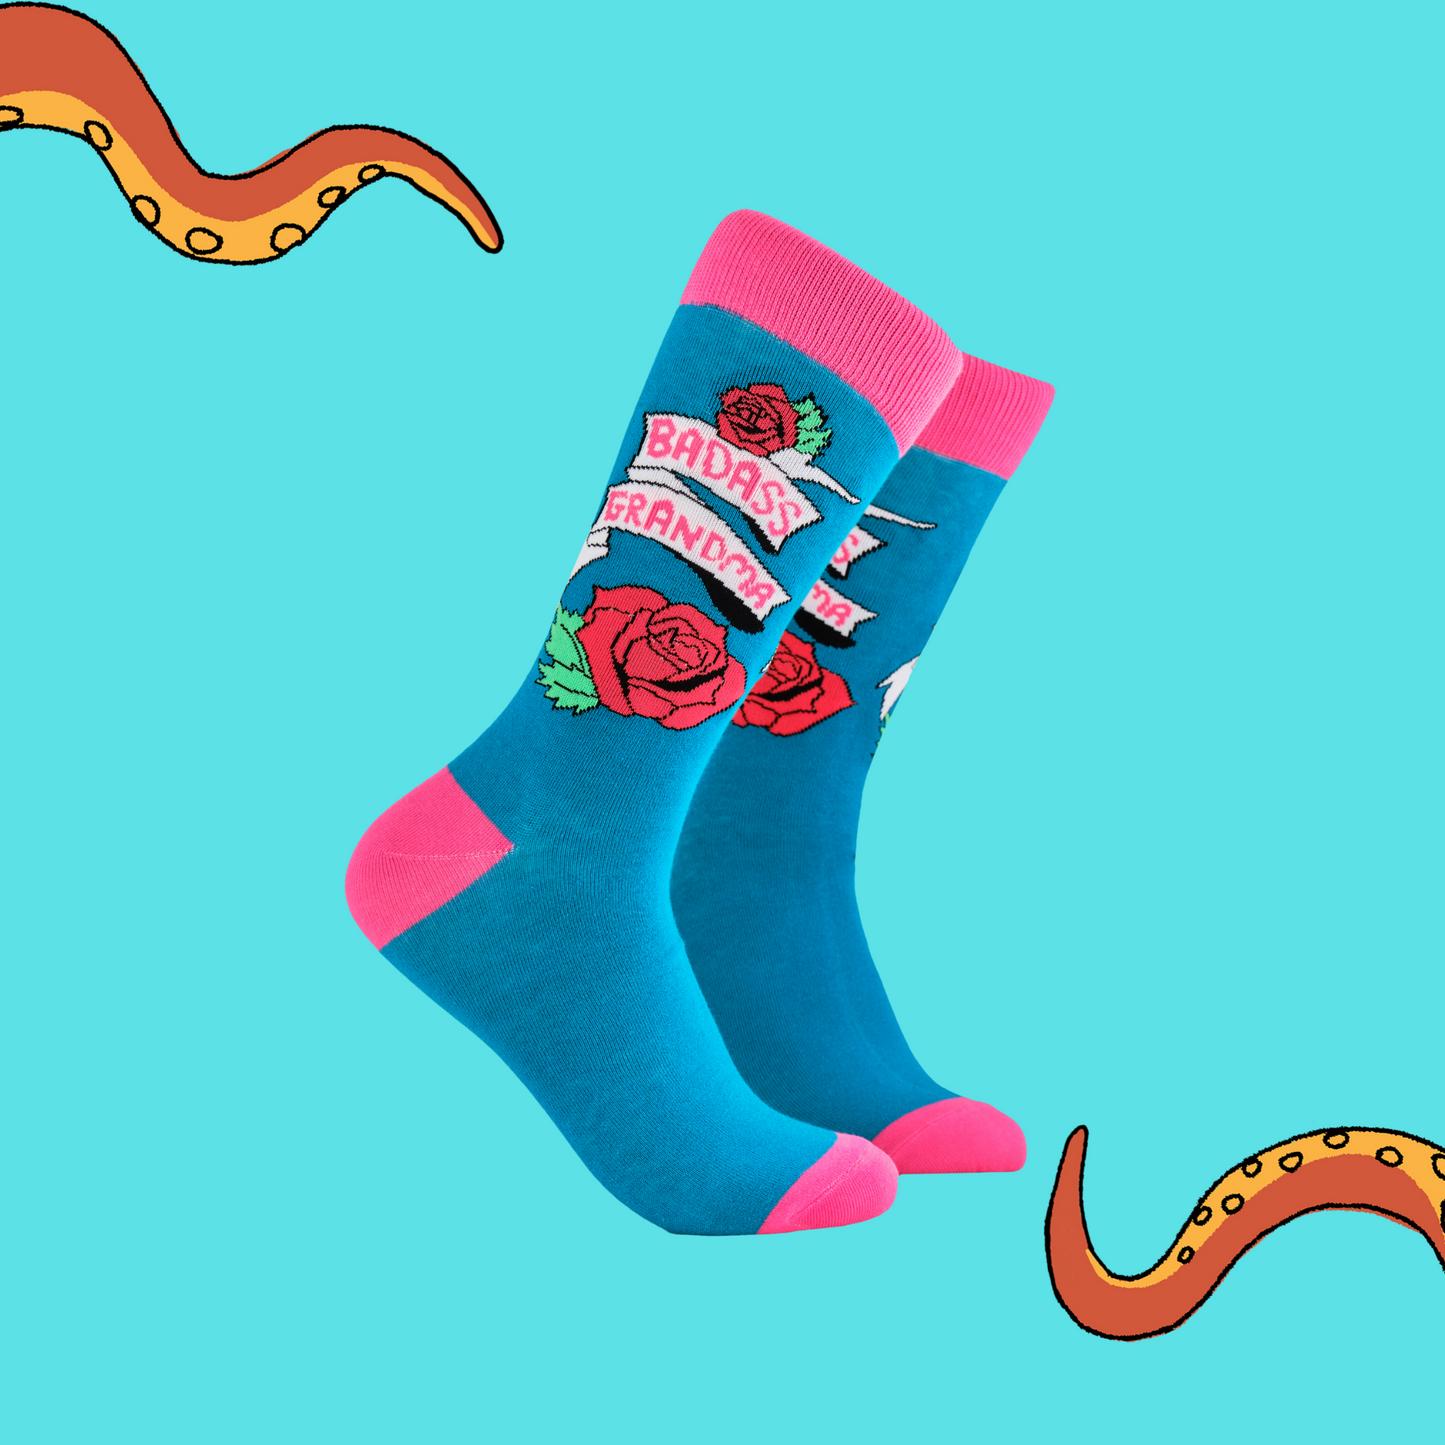 A pair of socks depicting roses and the phrase Baddass Grandma. Blue legs, pink cuff, heel and toe.